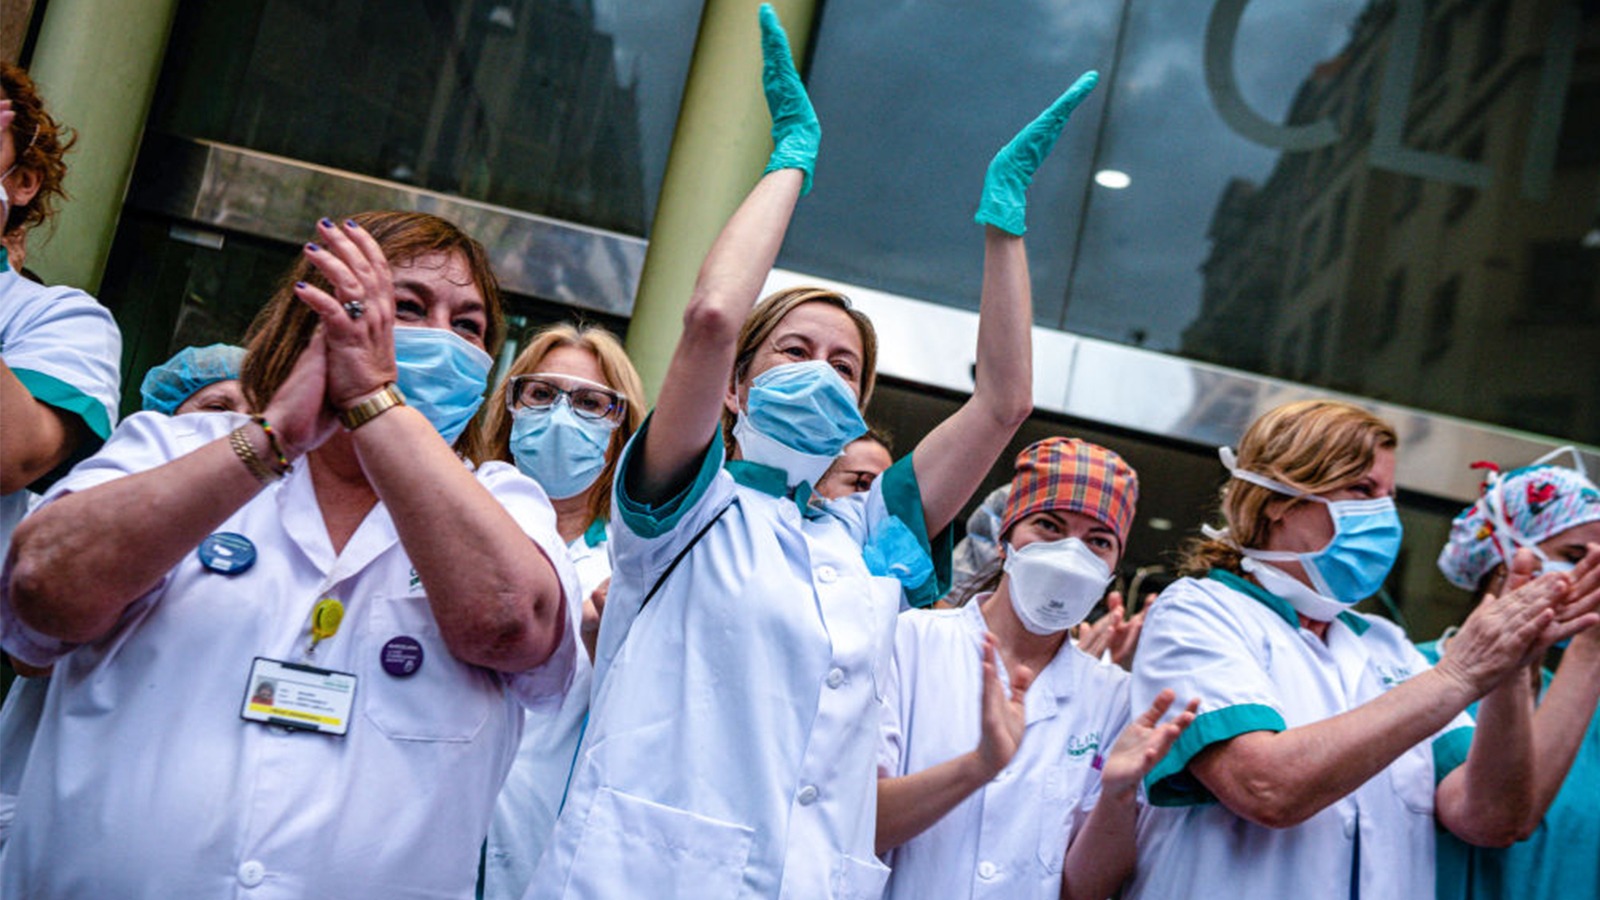 Health care workers stand together in masks